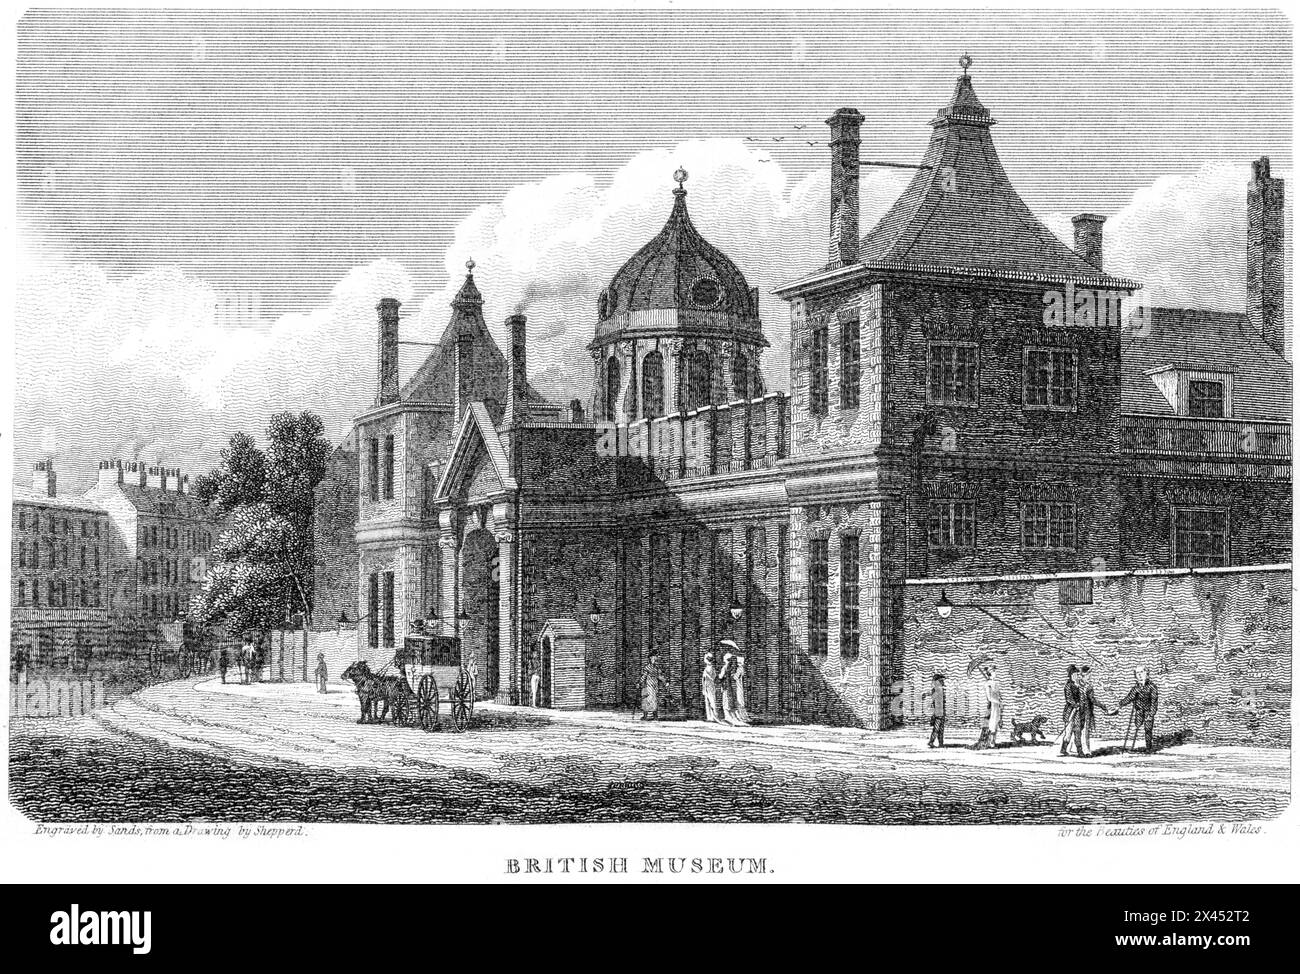 An engraving entitled the British Museum, London UK scanned at high resolution from a book published around 1815. Believed copyright free. Stock Photo